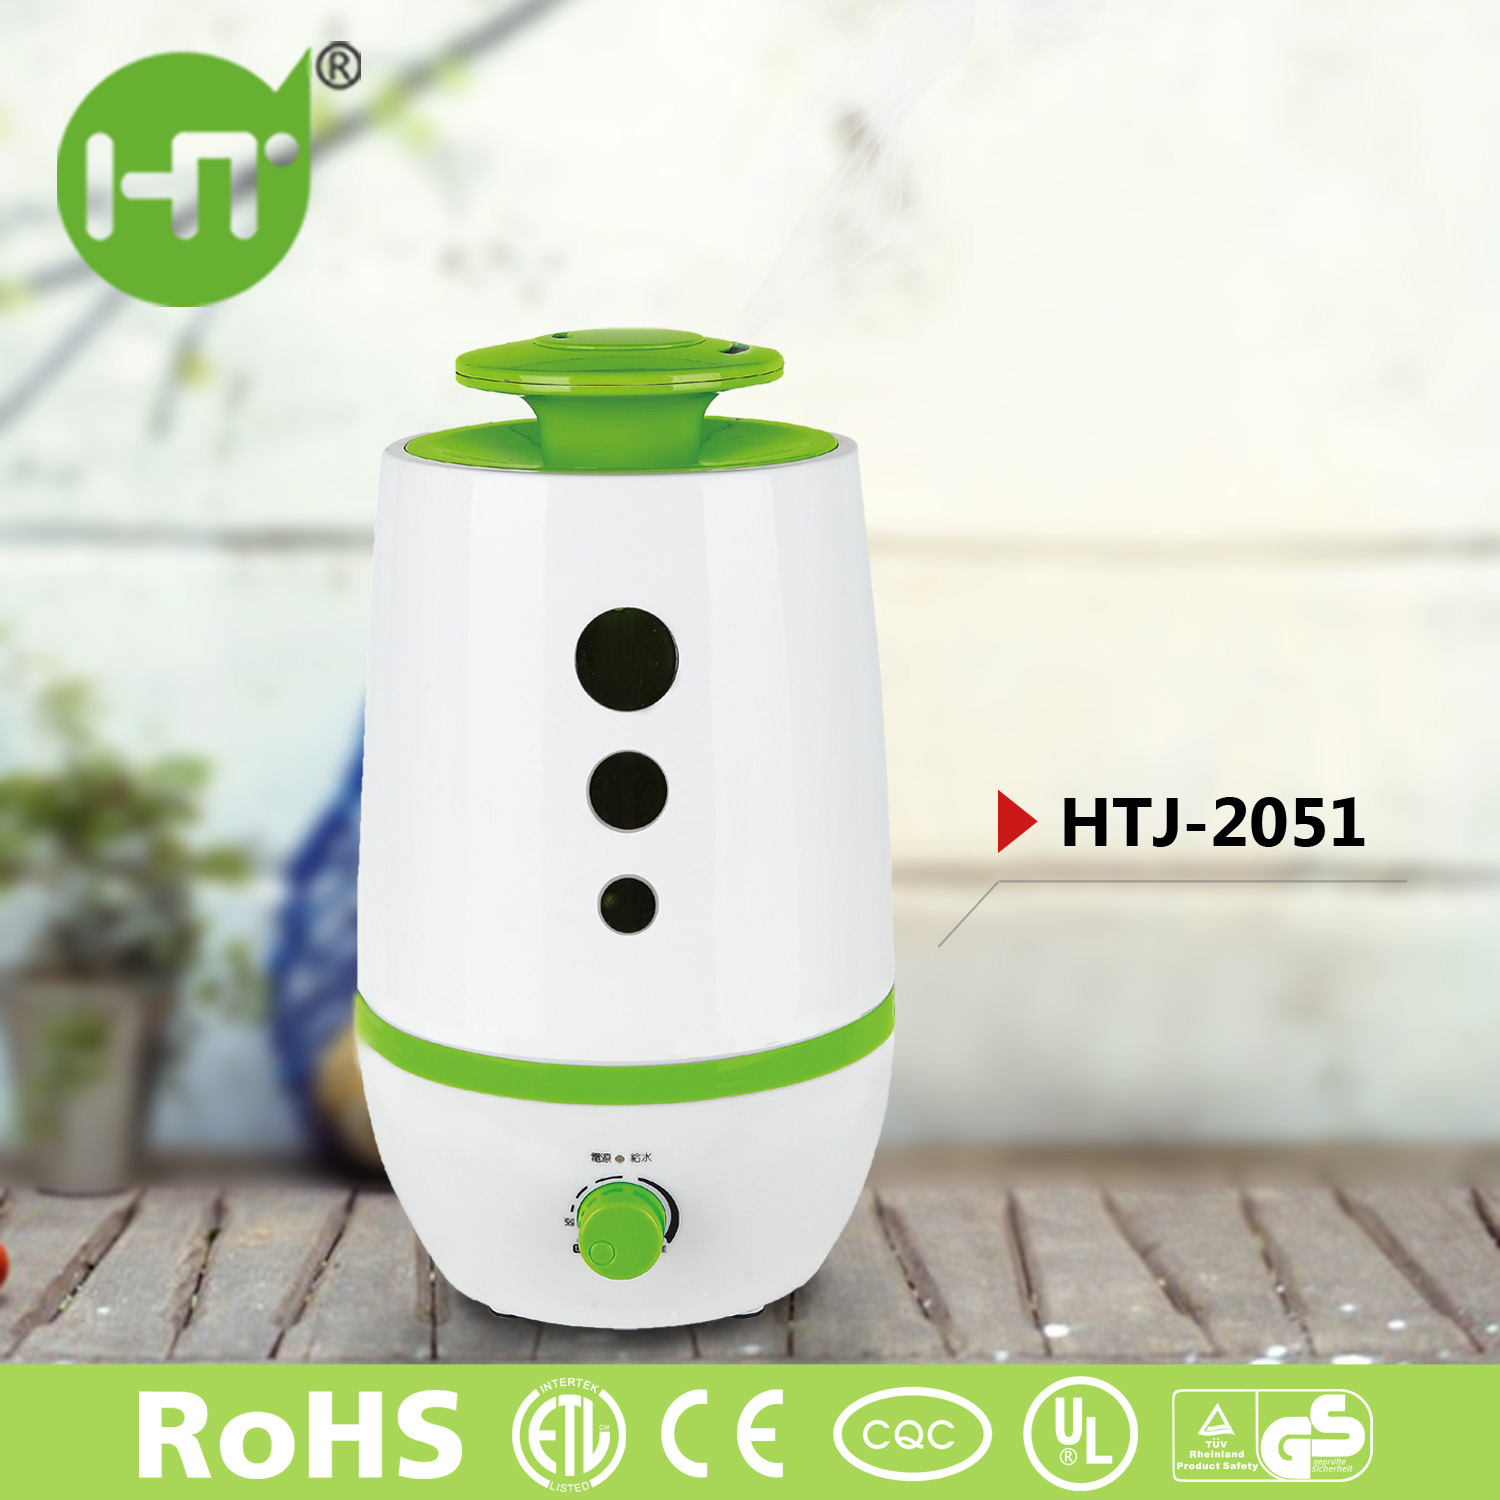 HTJ-2051 2.6L Jade-Like Elegant Air Cooler Humidifier Essential Oil Available Ultrasonic Humidifier